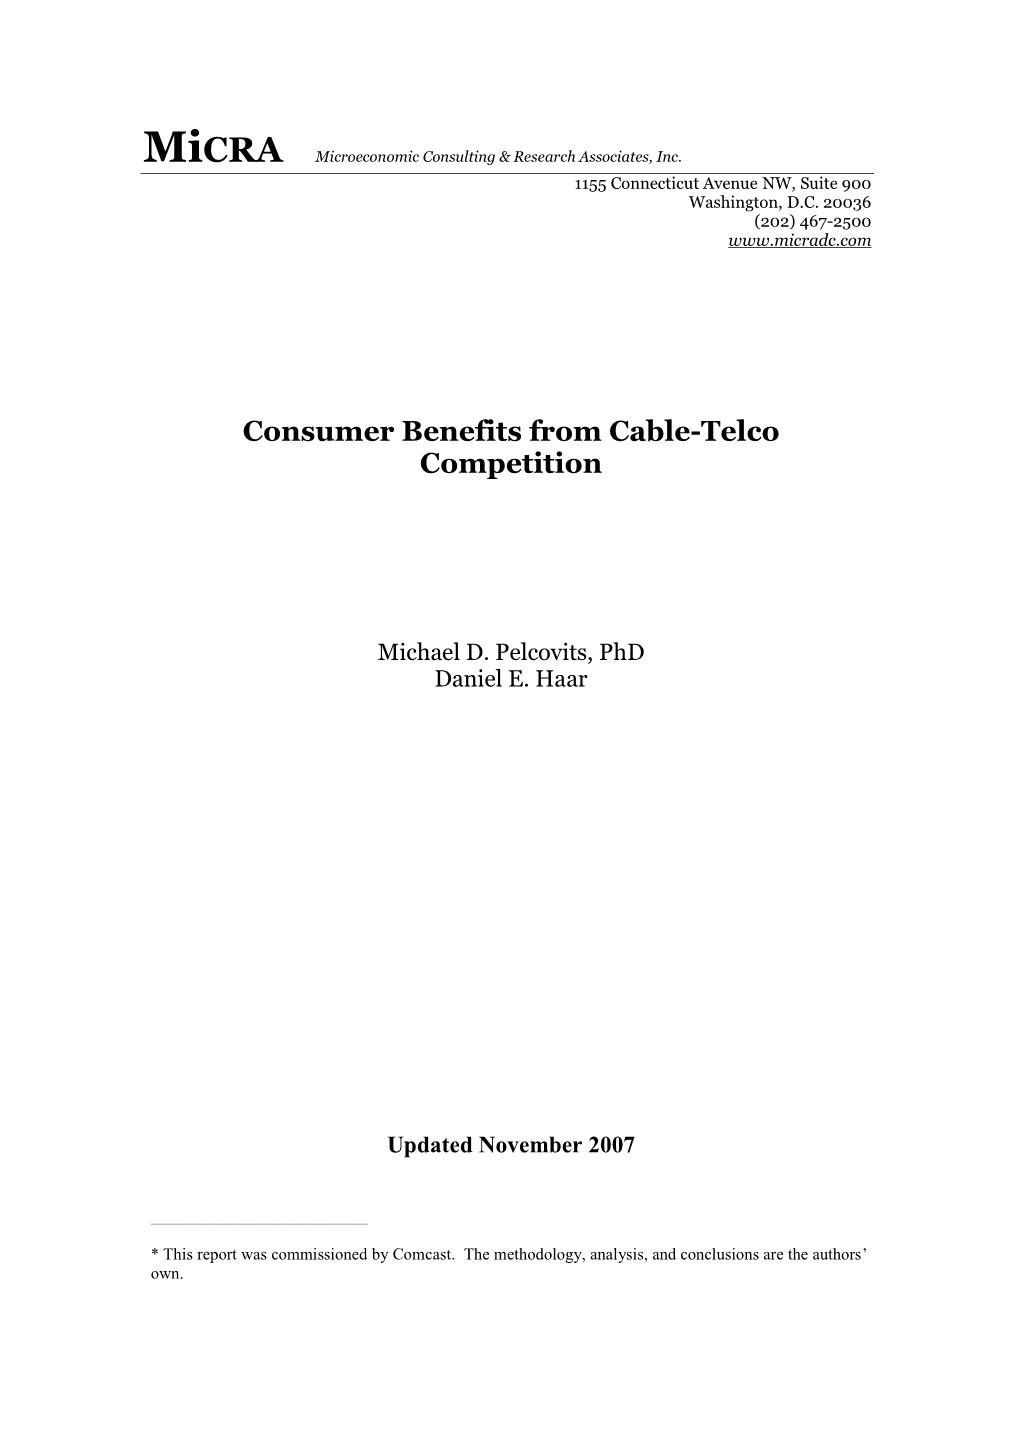 Consumer Benefits from Cable-Telco Competition